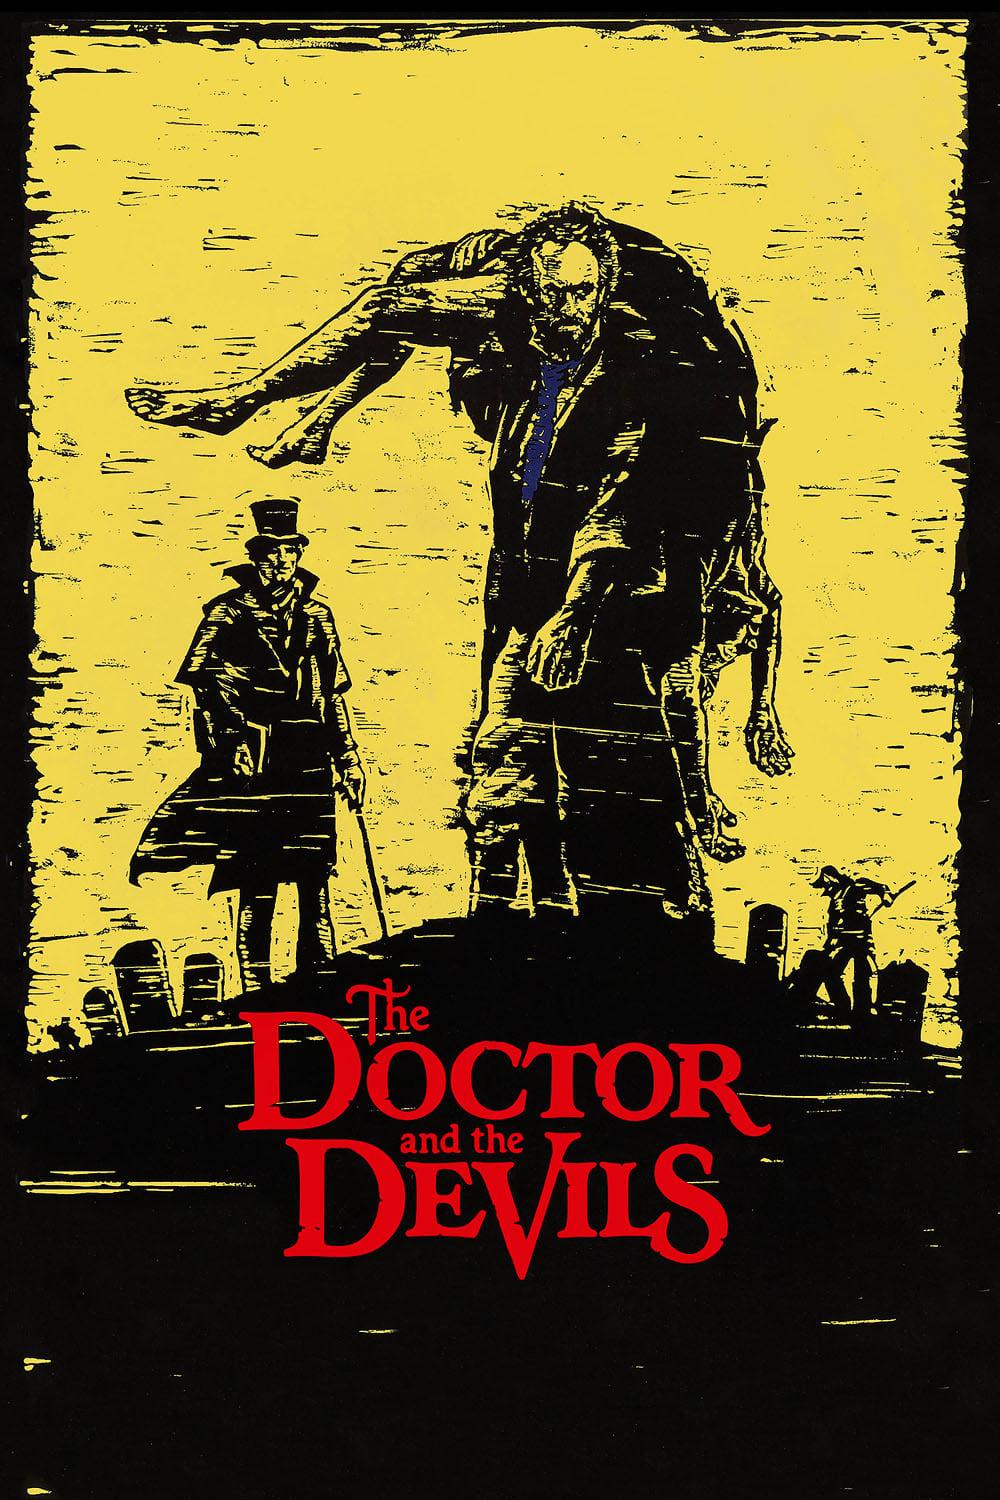 The Doctor and the Devils poster